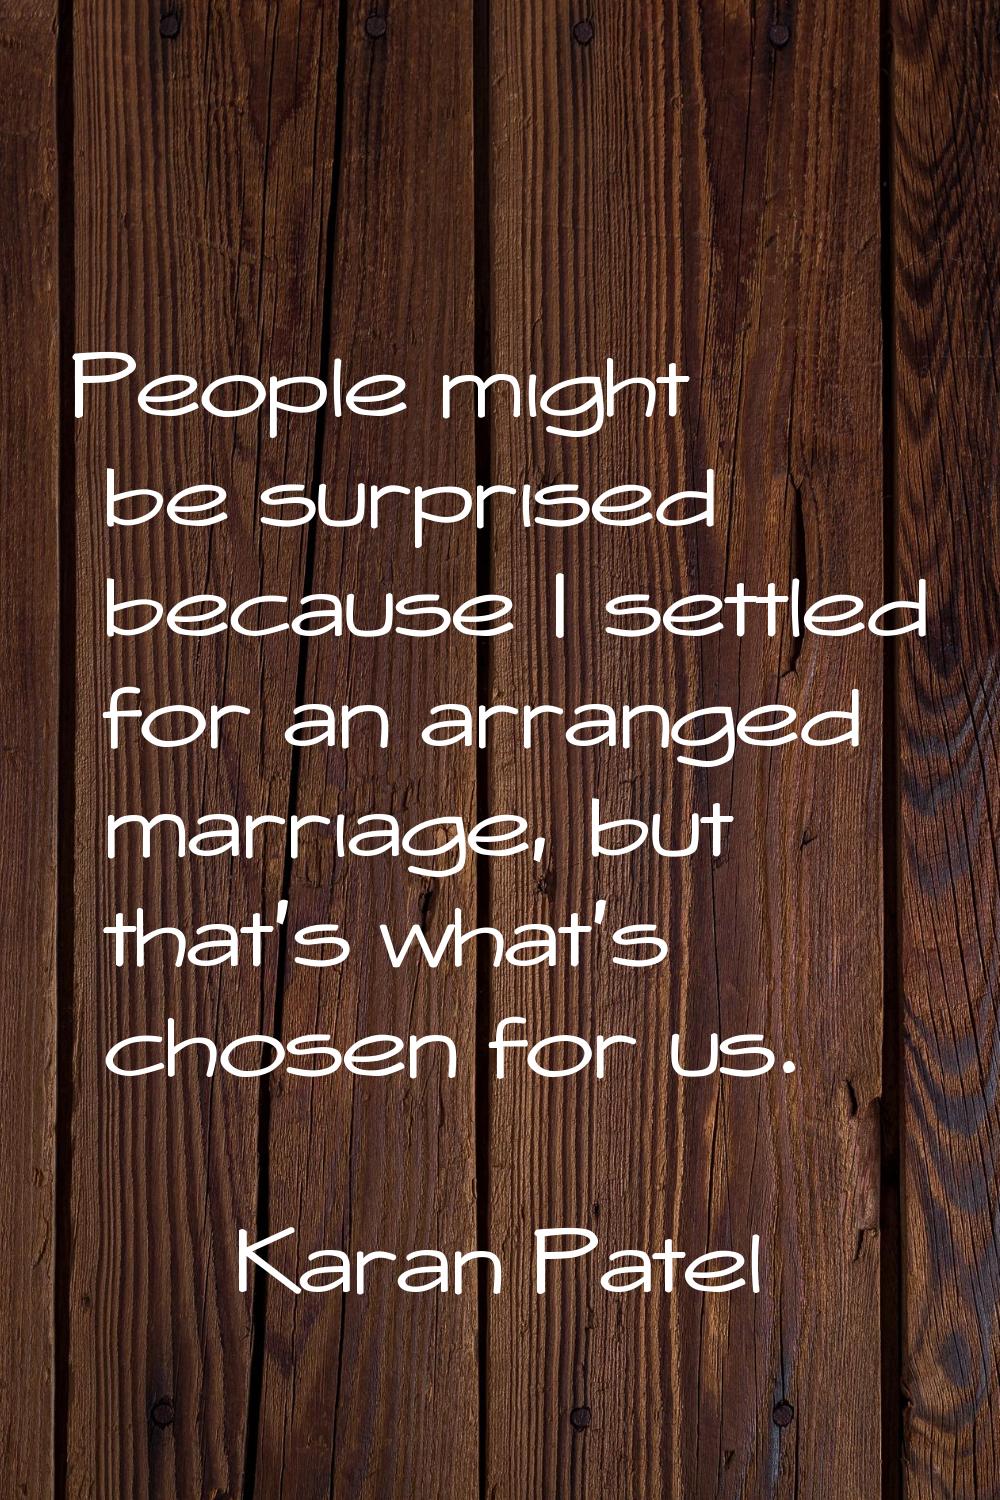 People might be surprised because I settled for an arranged marriage, but that's what's chosen for 